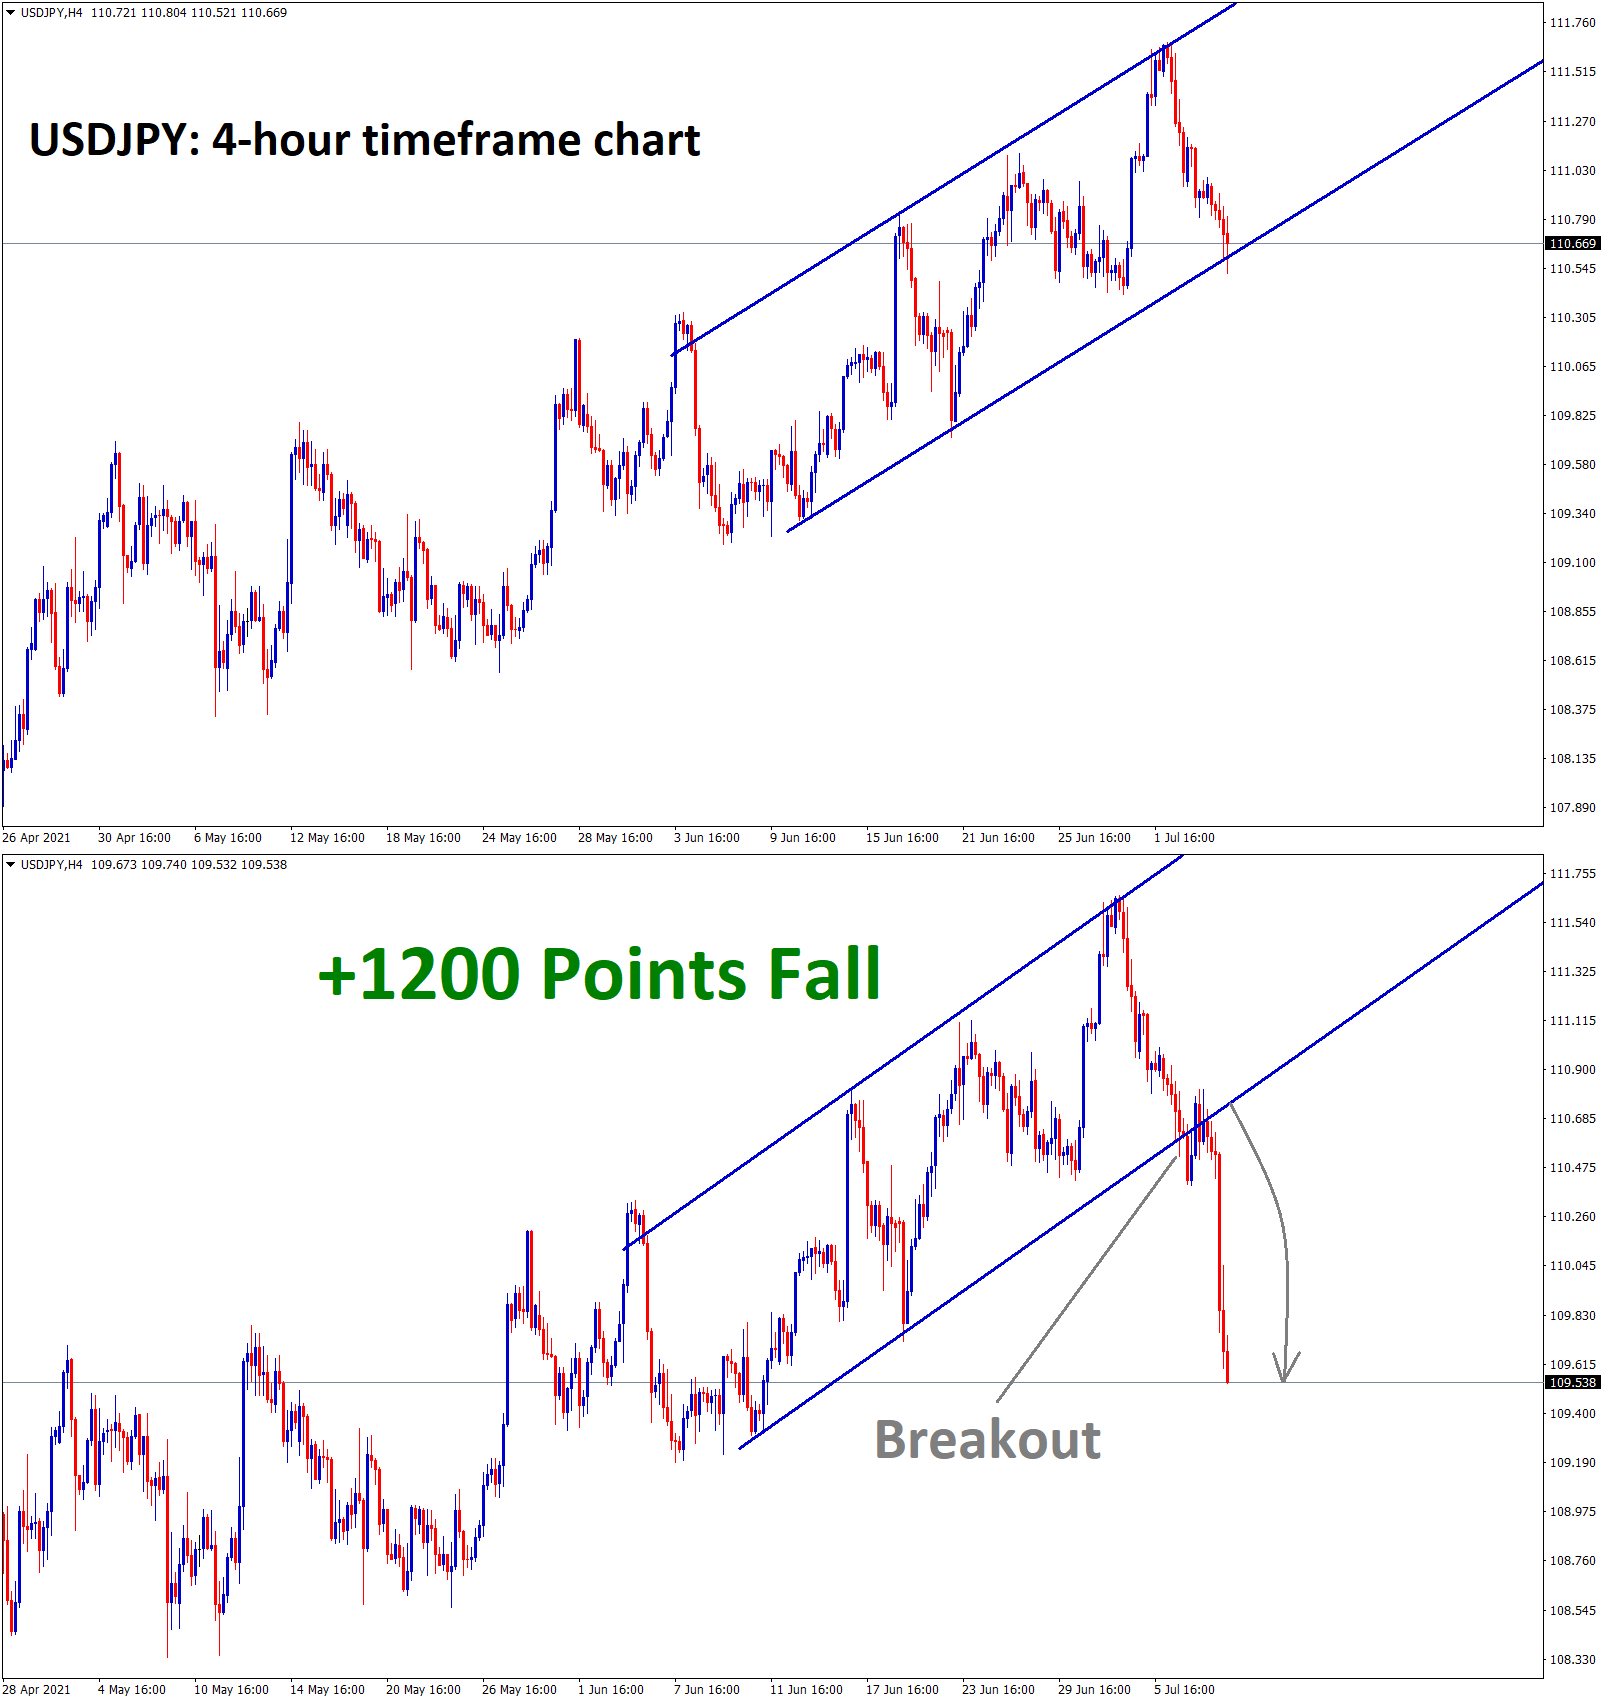 USDJPY hits the higher low zone wait for reversal or breakout 1